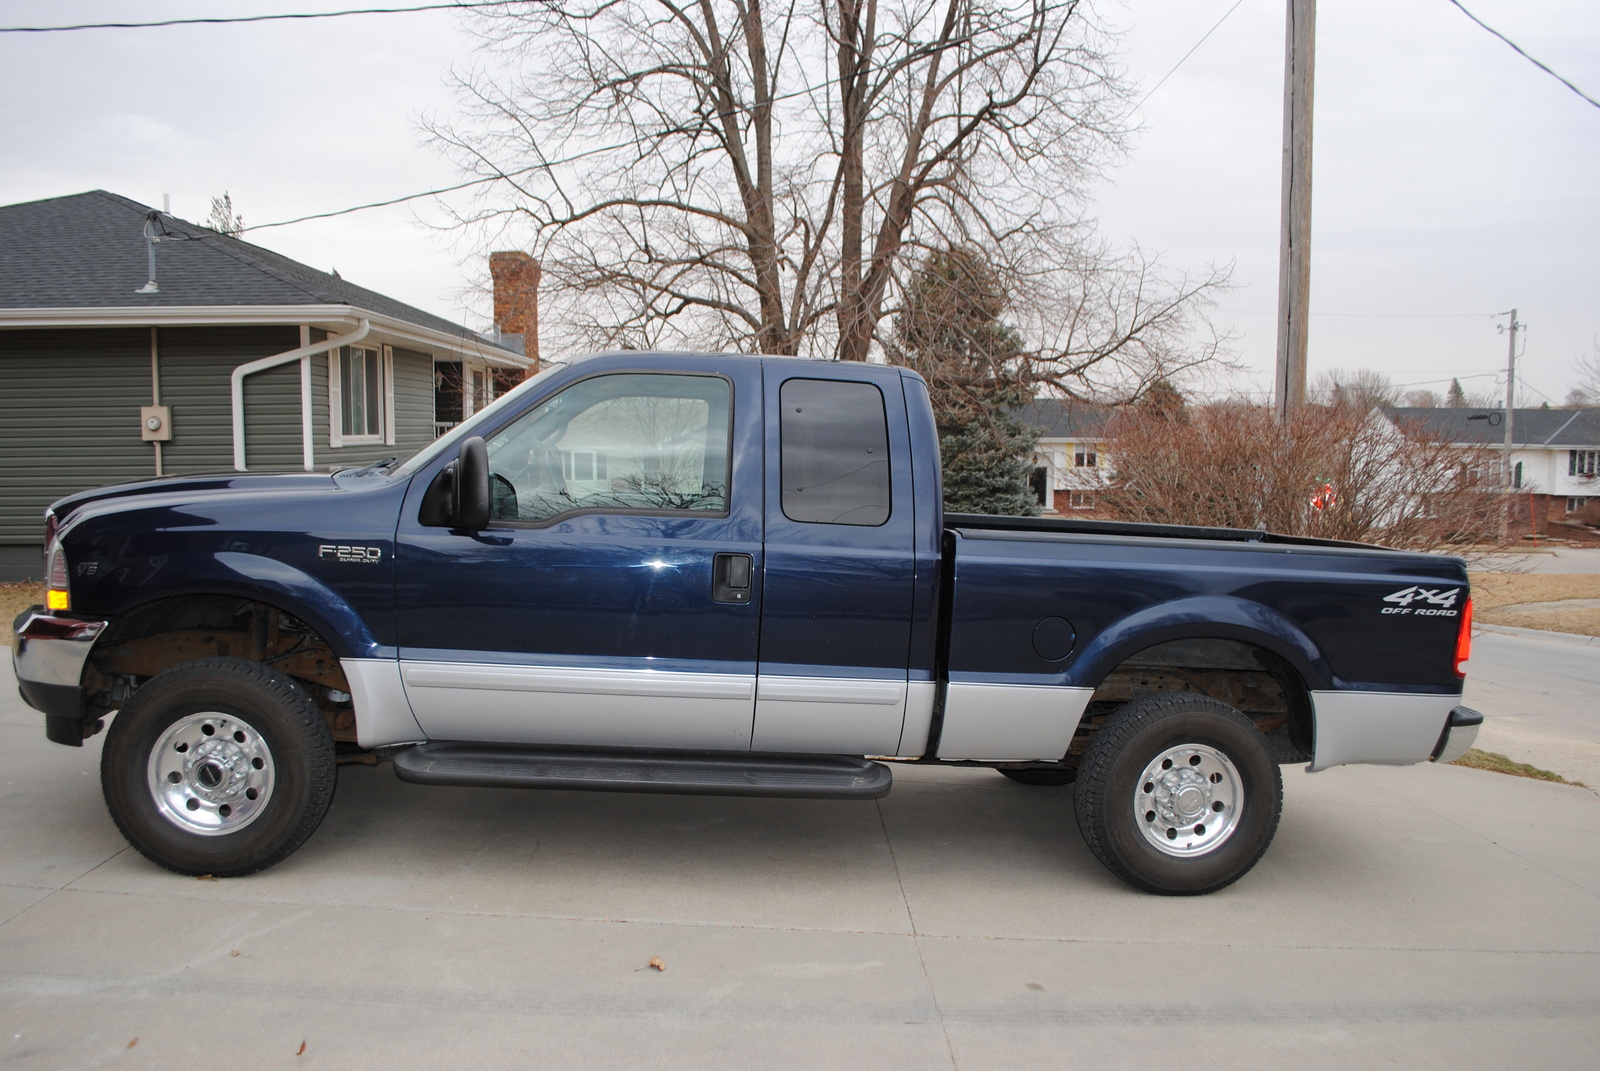 2002 Ford f250 payload #5